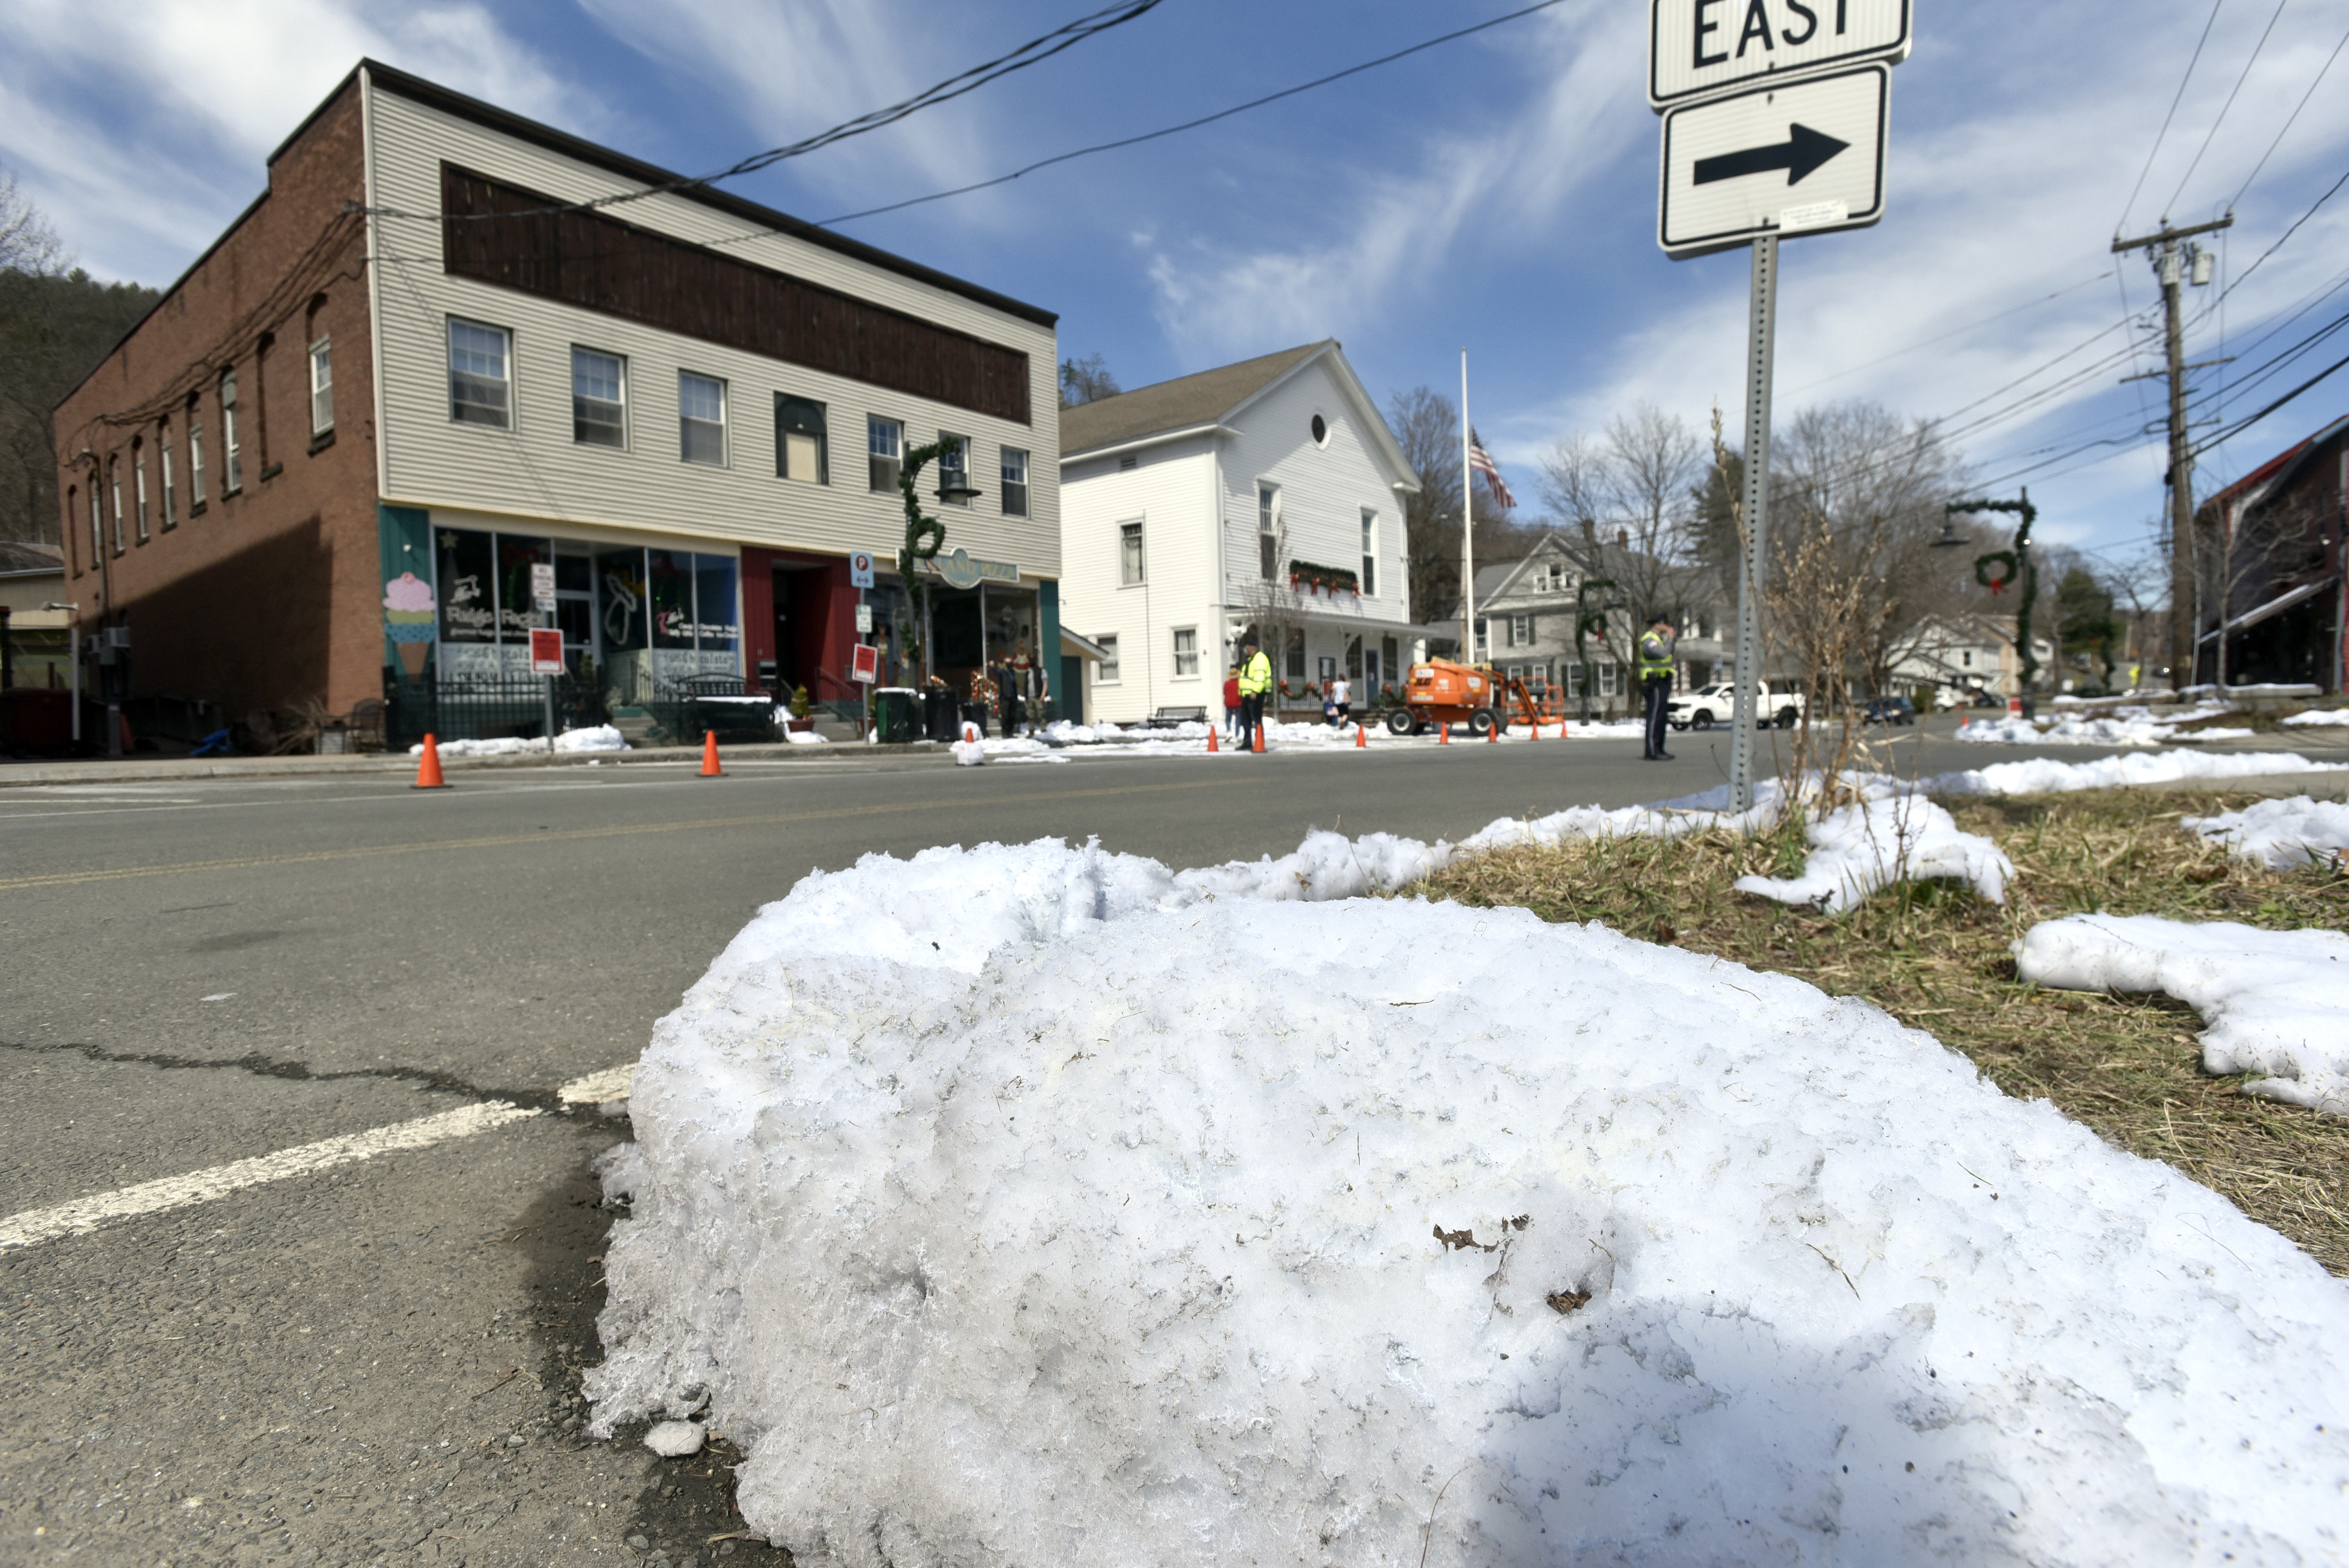 Lots of fake snow has been laid around downtown Sheloburne Falls for the filming of the show Dexter, April 7, 2021.   (Don Treeger / The Republican)